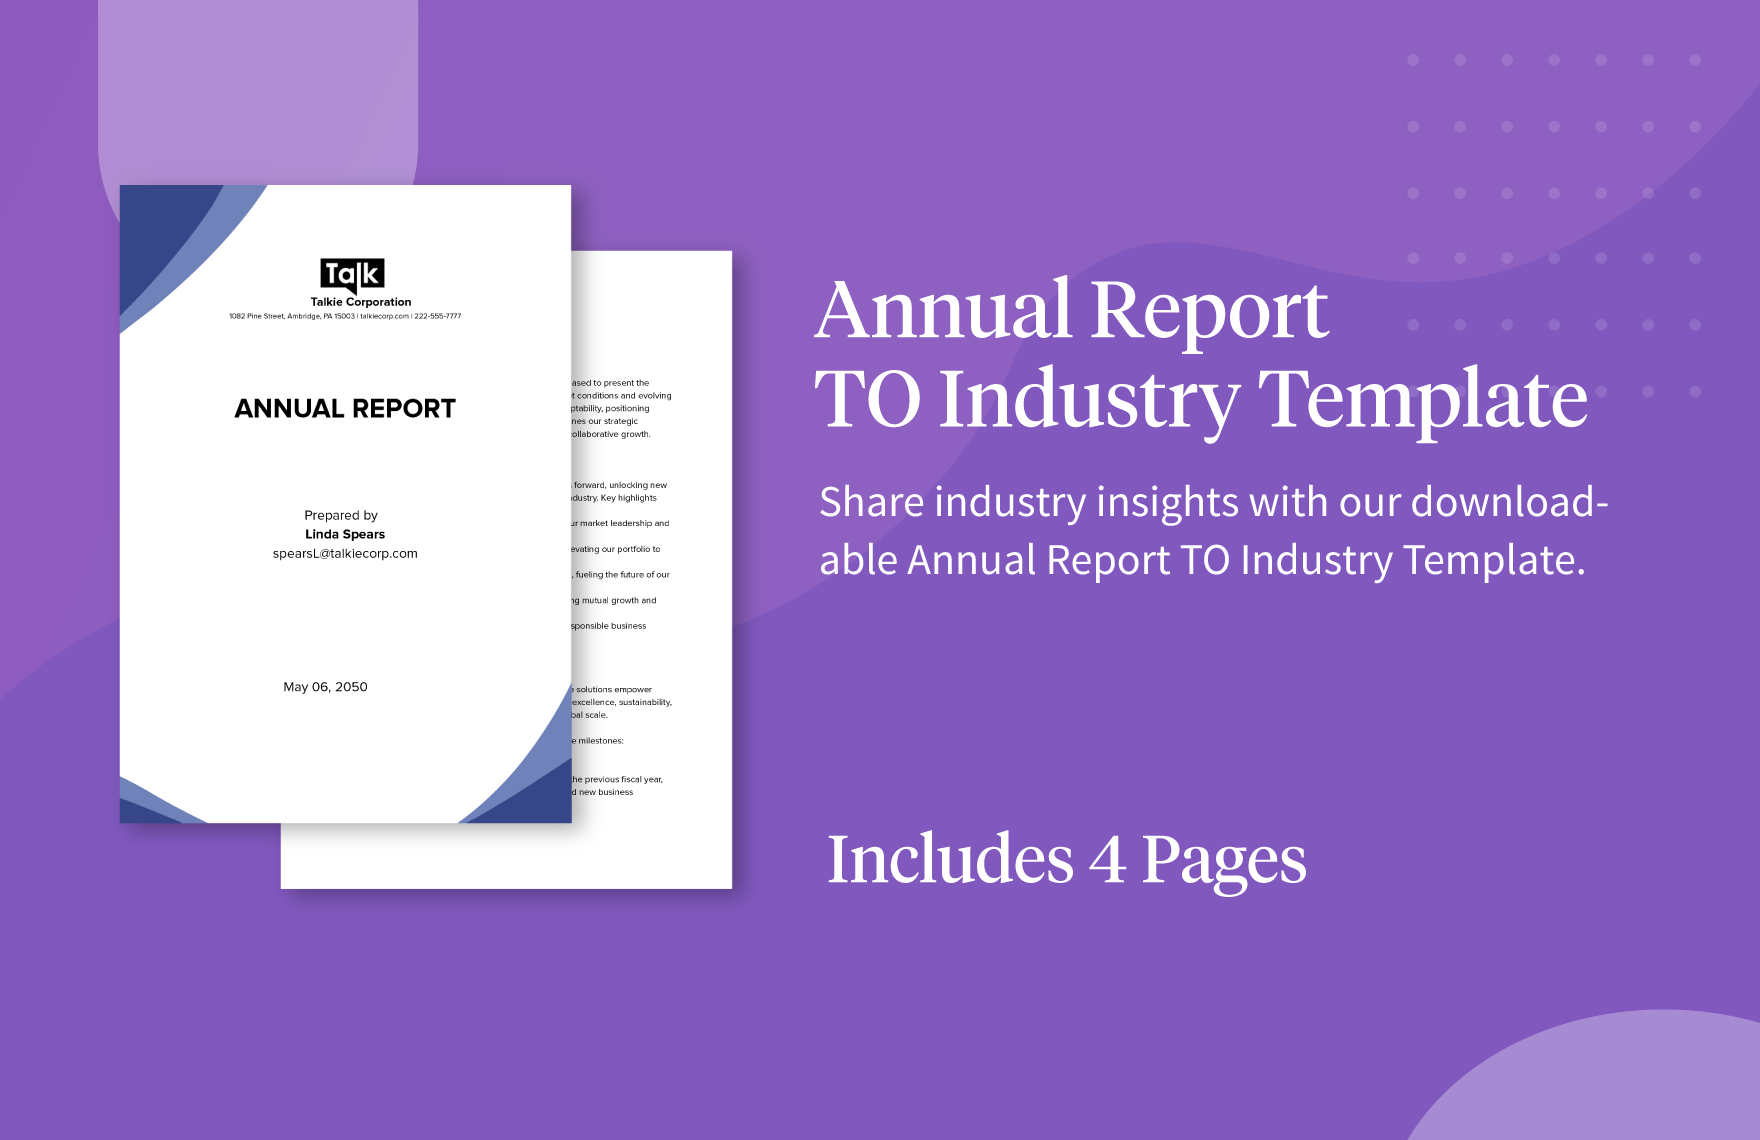 Annual Report TO Industry Template